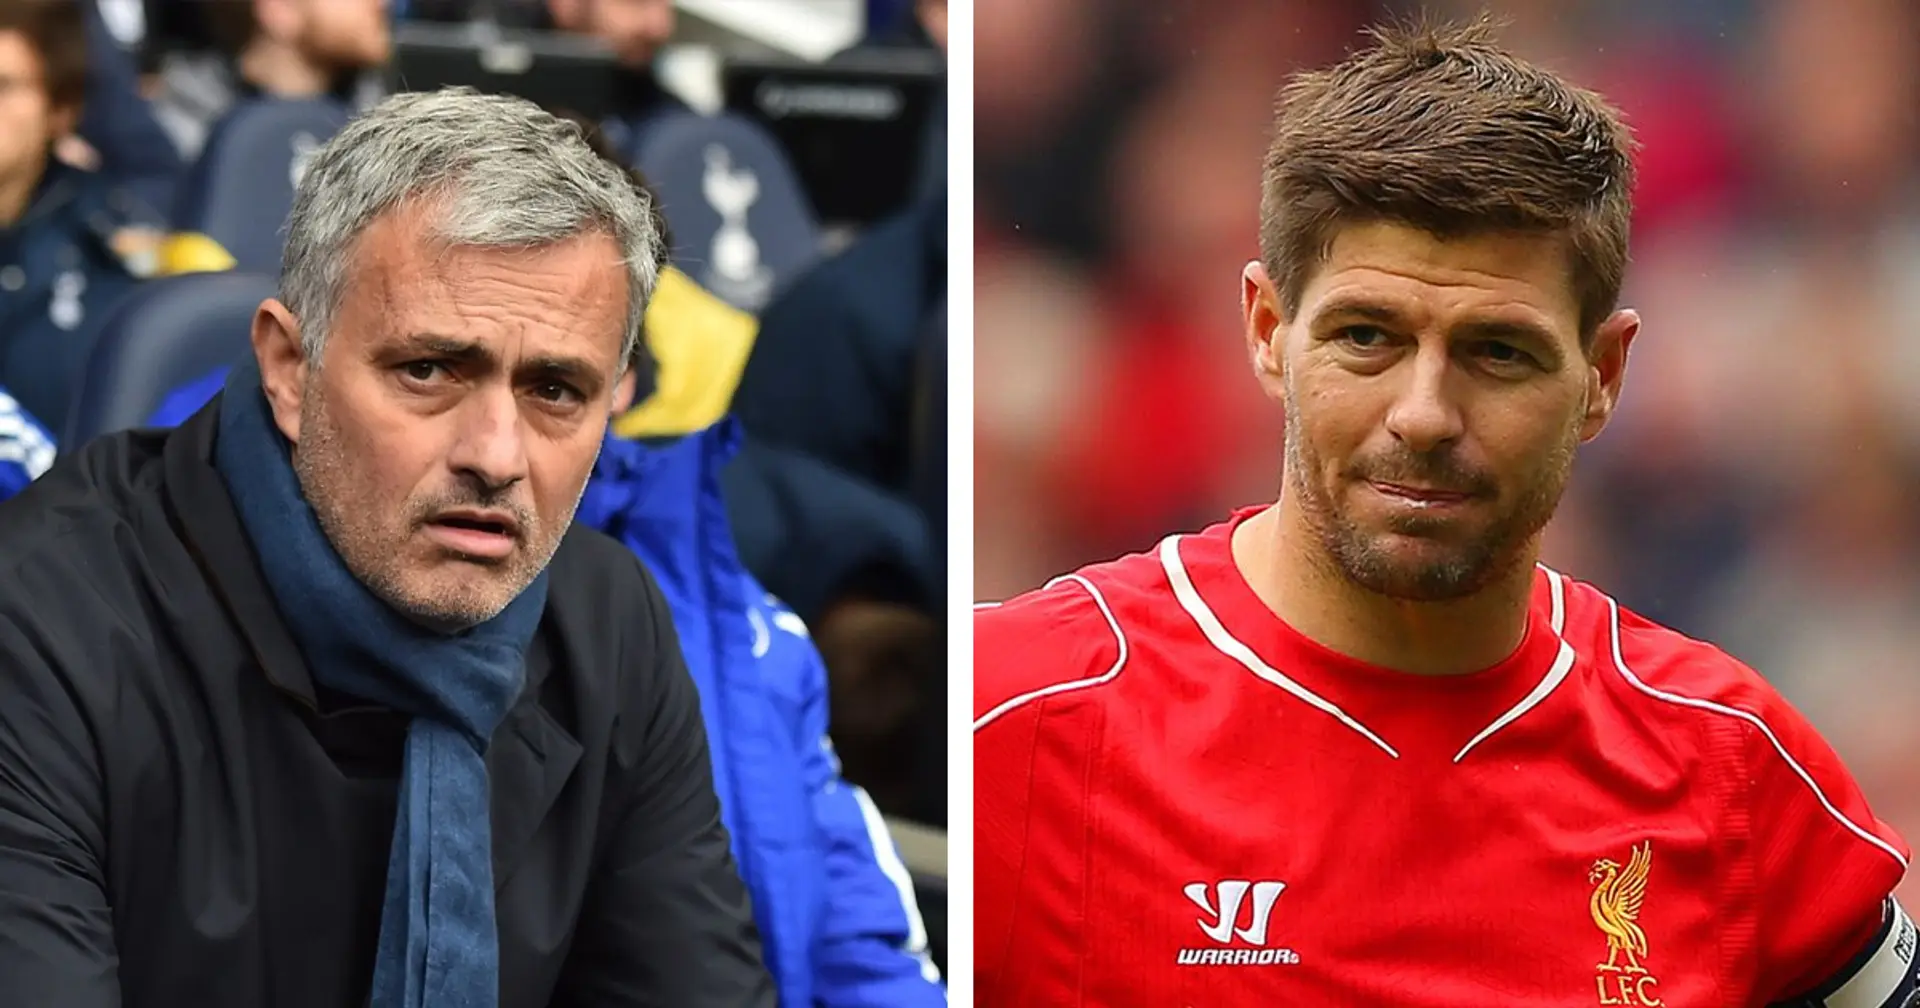 Steven Gerrard reveals how much Chelsea were ready to spend to lure him away to Stamford Bridge